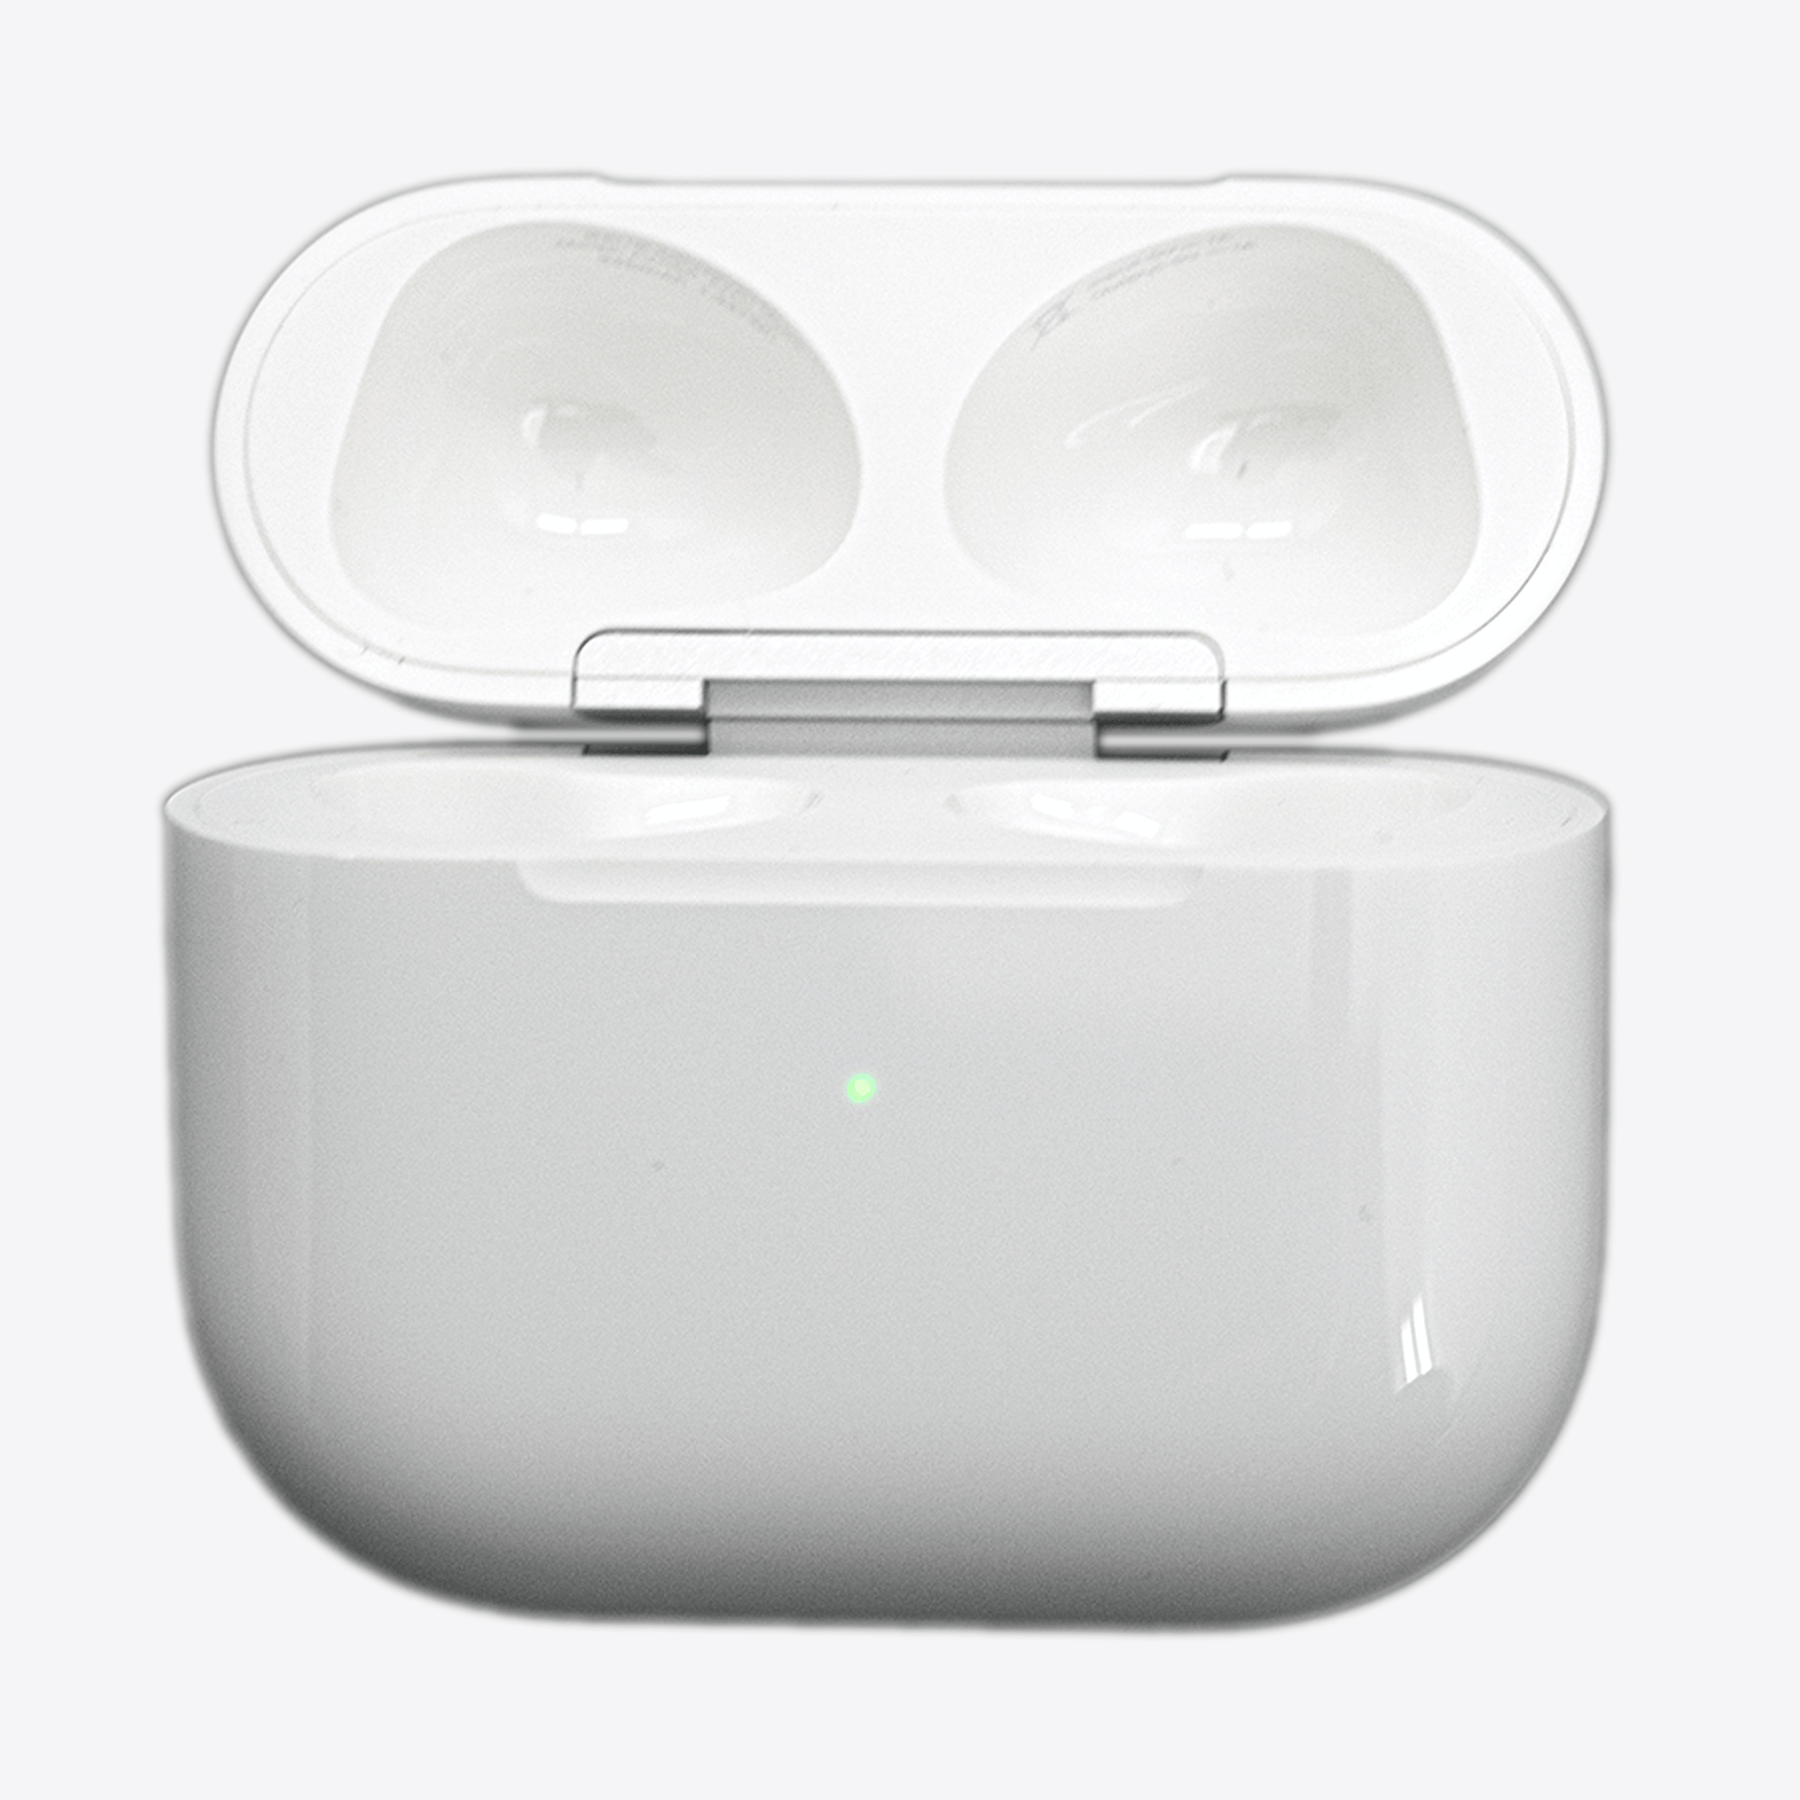 Apple AirPods 3rd Generation Wireless Charging Case - Genuine